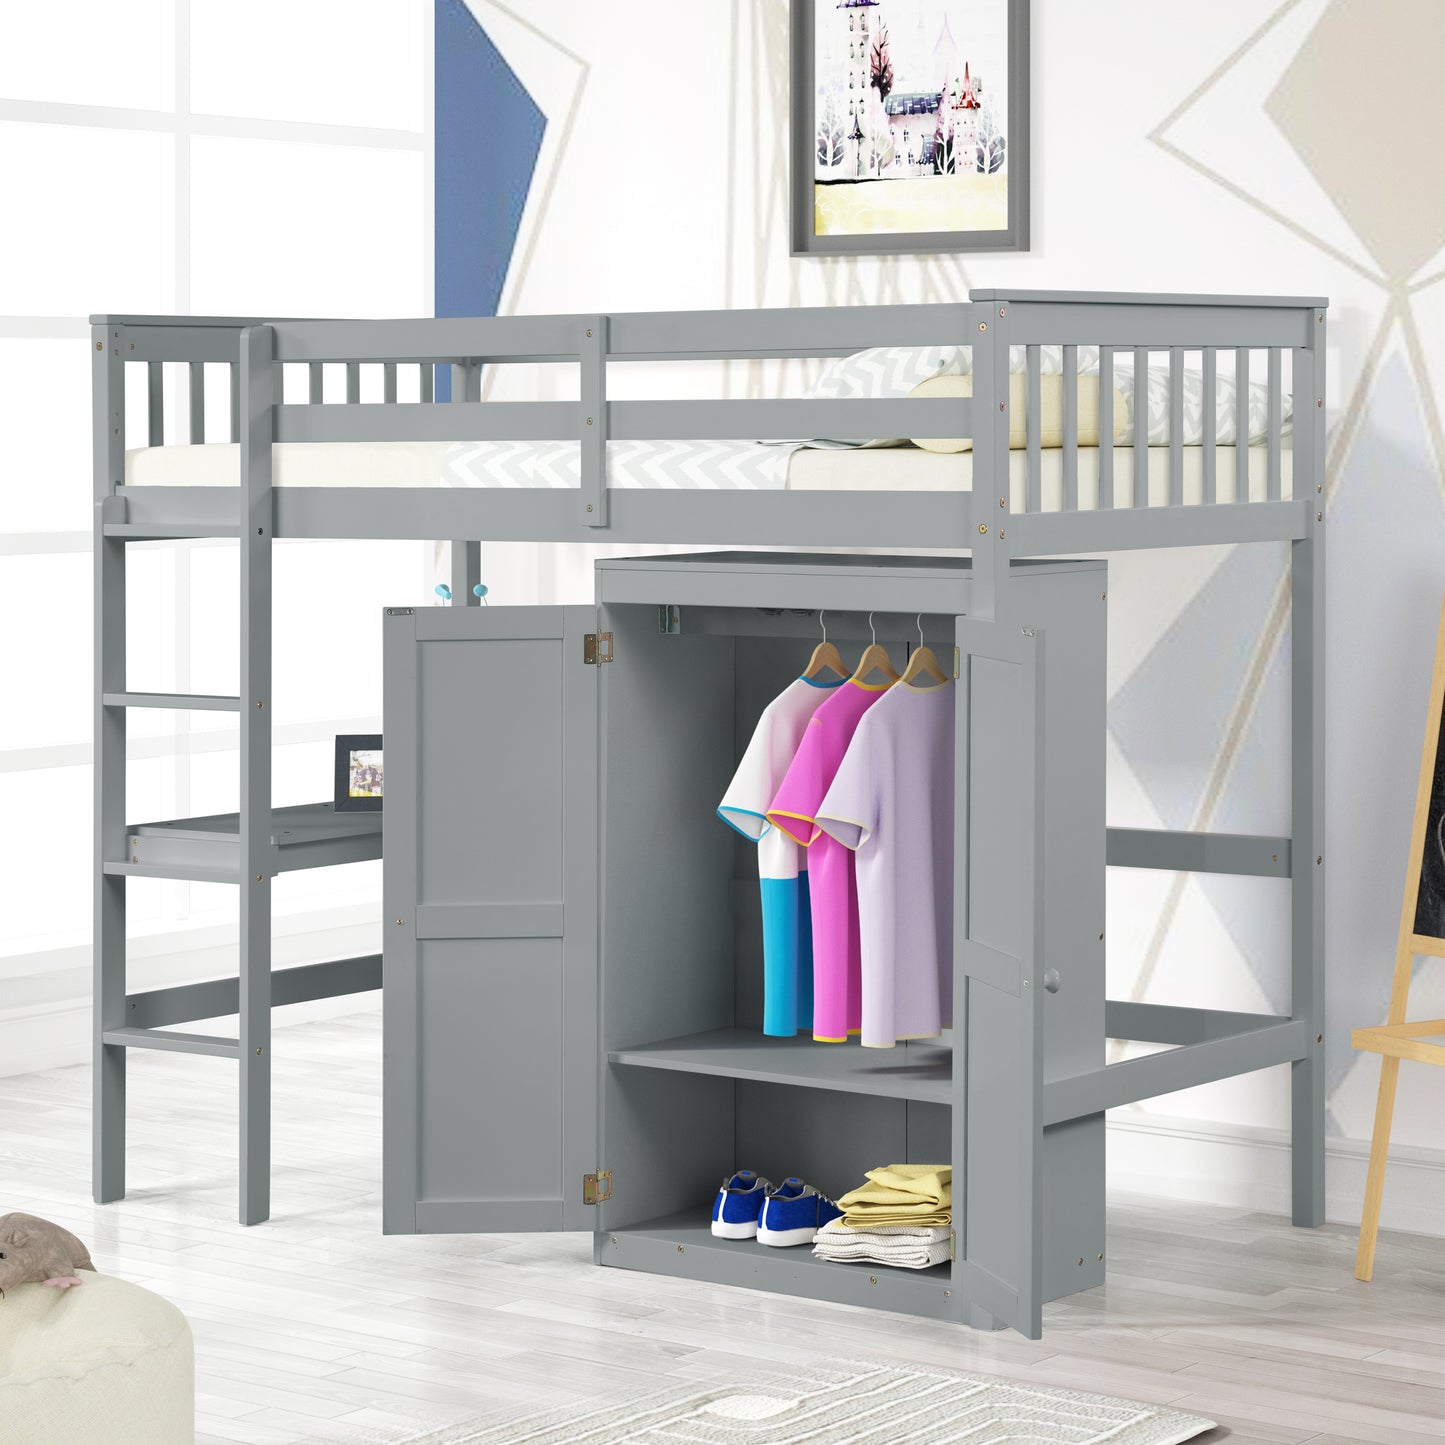 TWIN LOFT BED WITH DESK AND WARDROBE FOR GREY COLOR